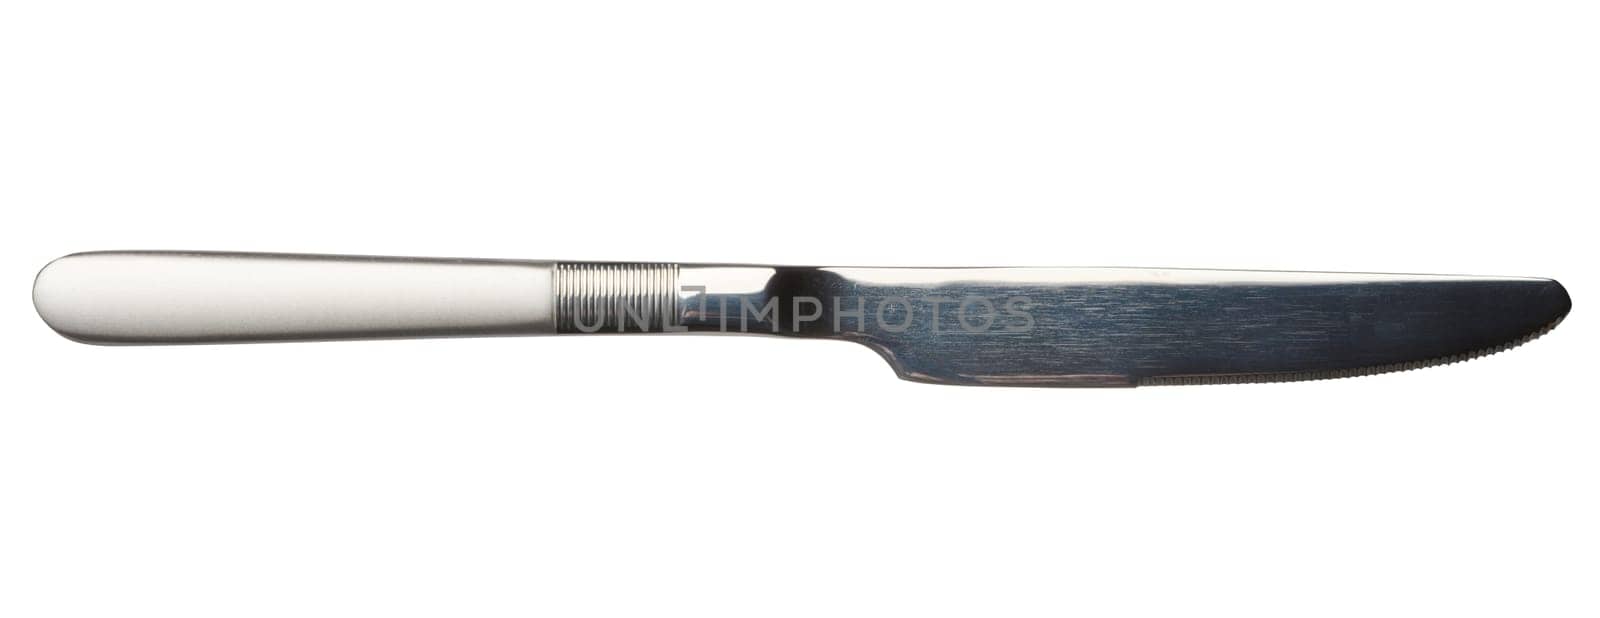 Steel dinner knife on isolated background